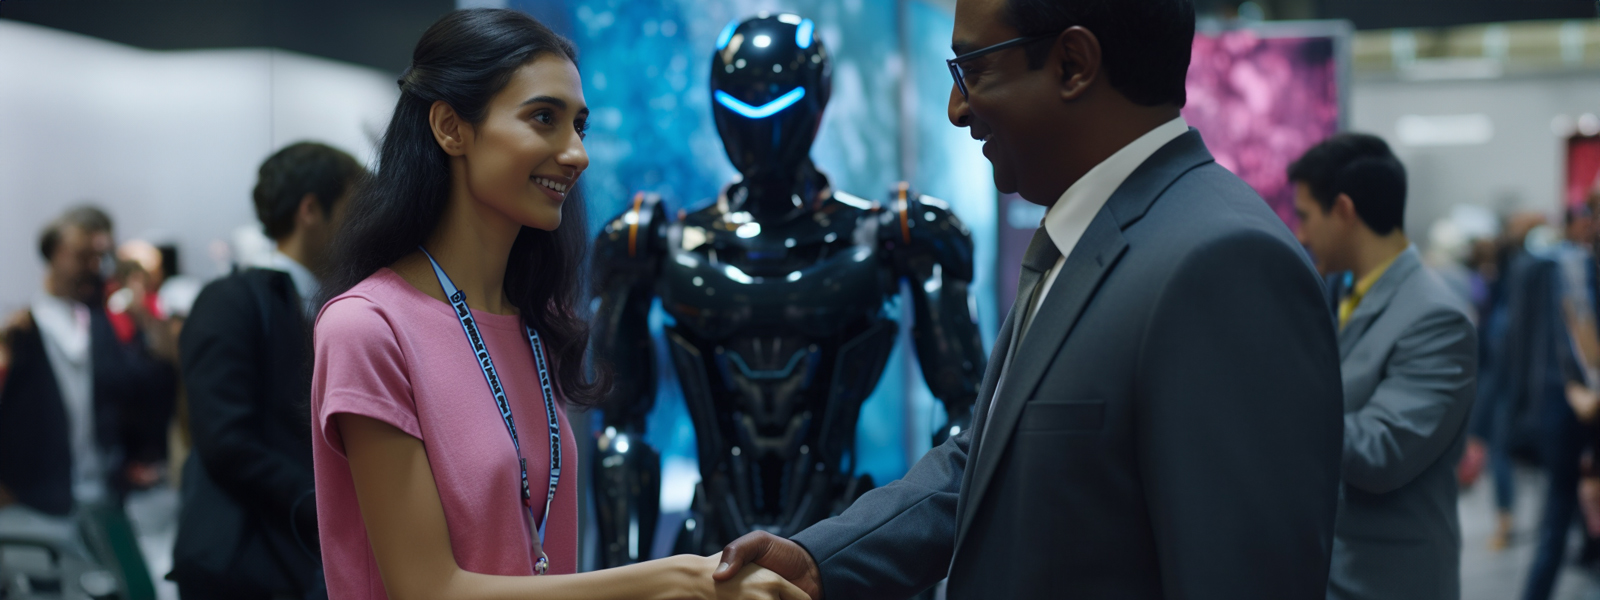 Woman and man shaking hands with a robot behind them